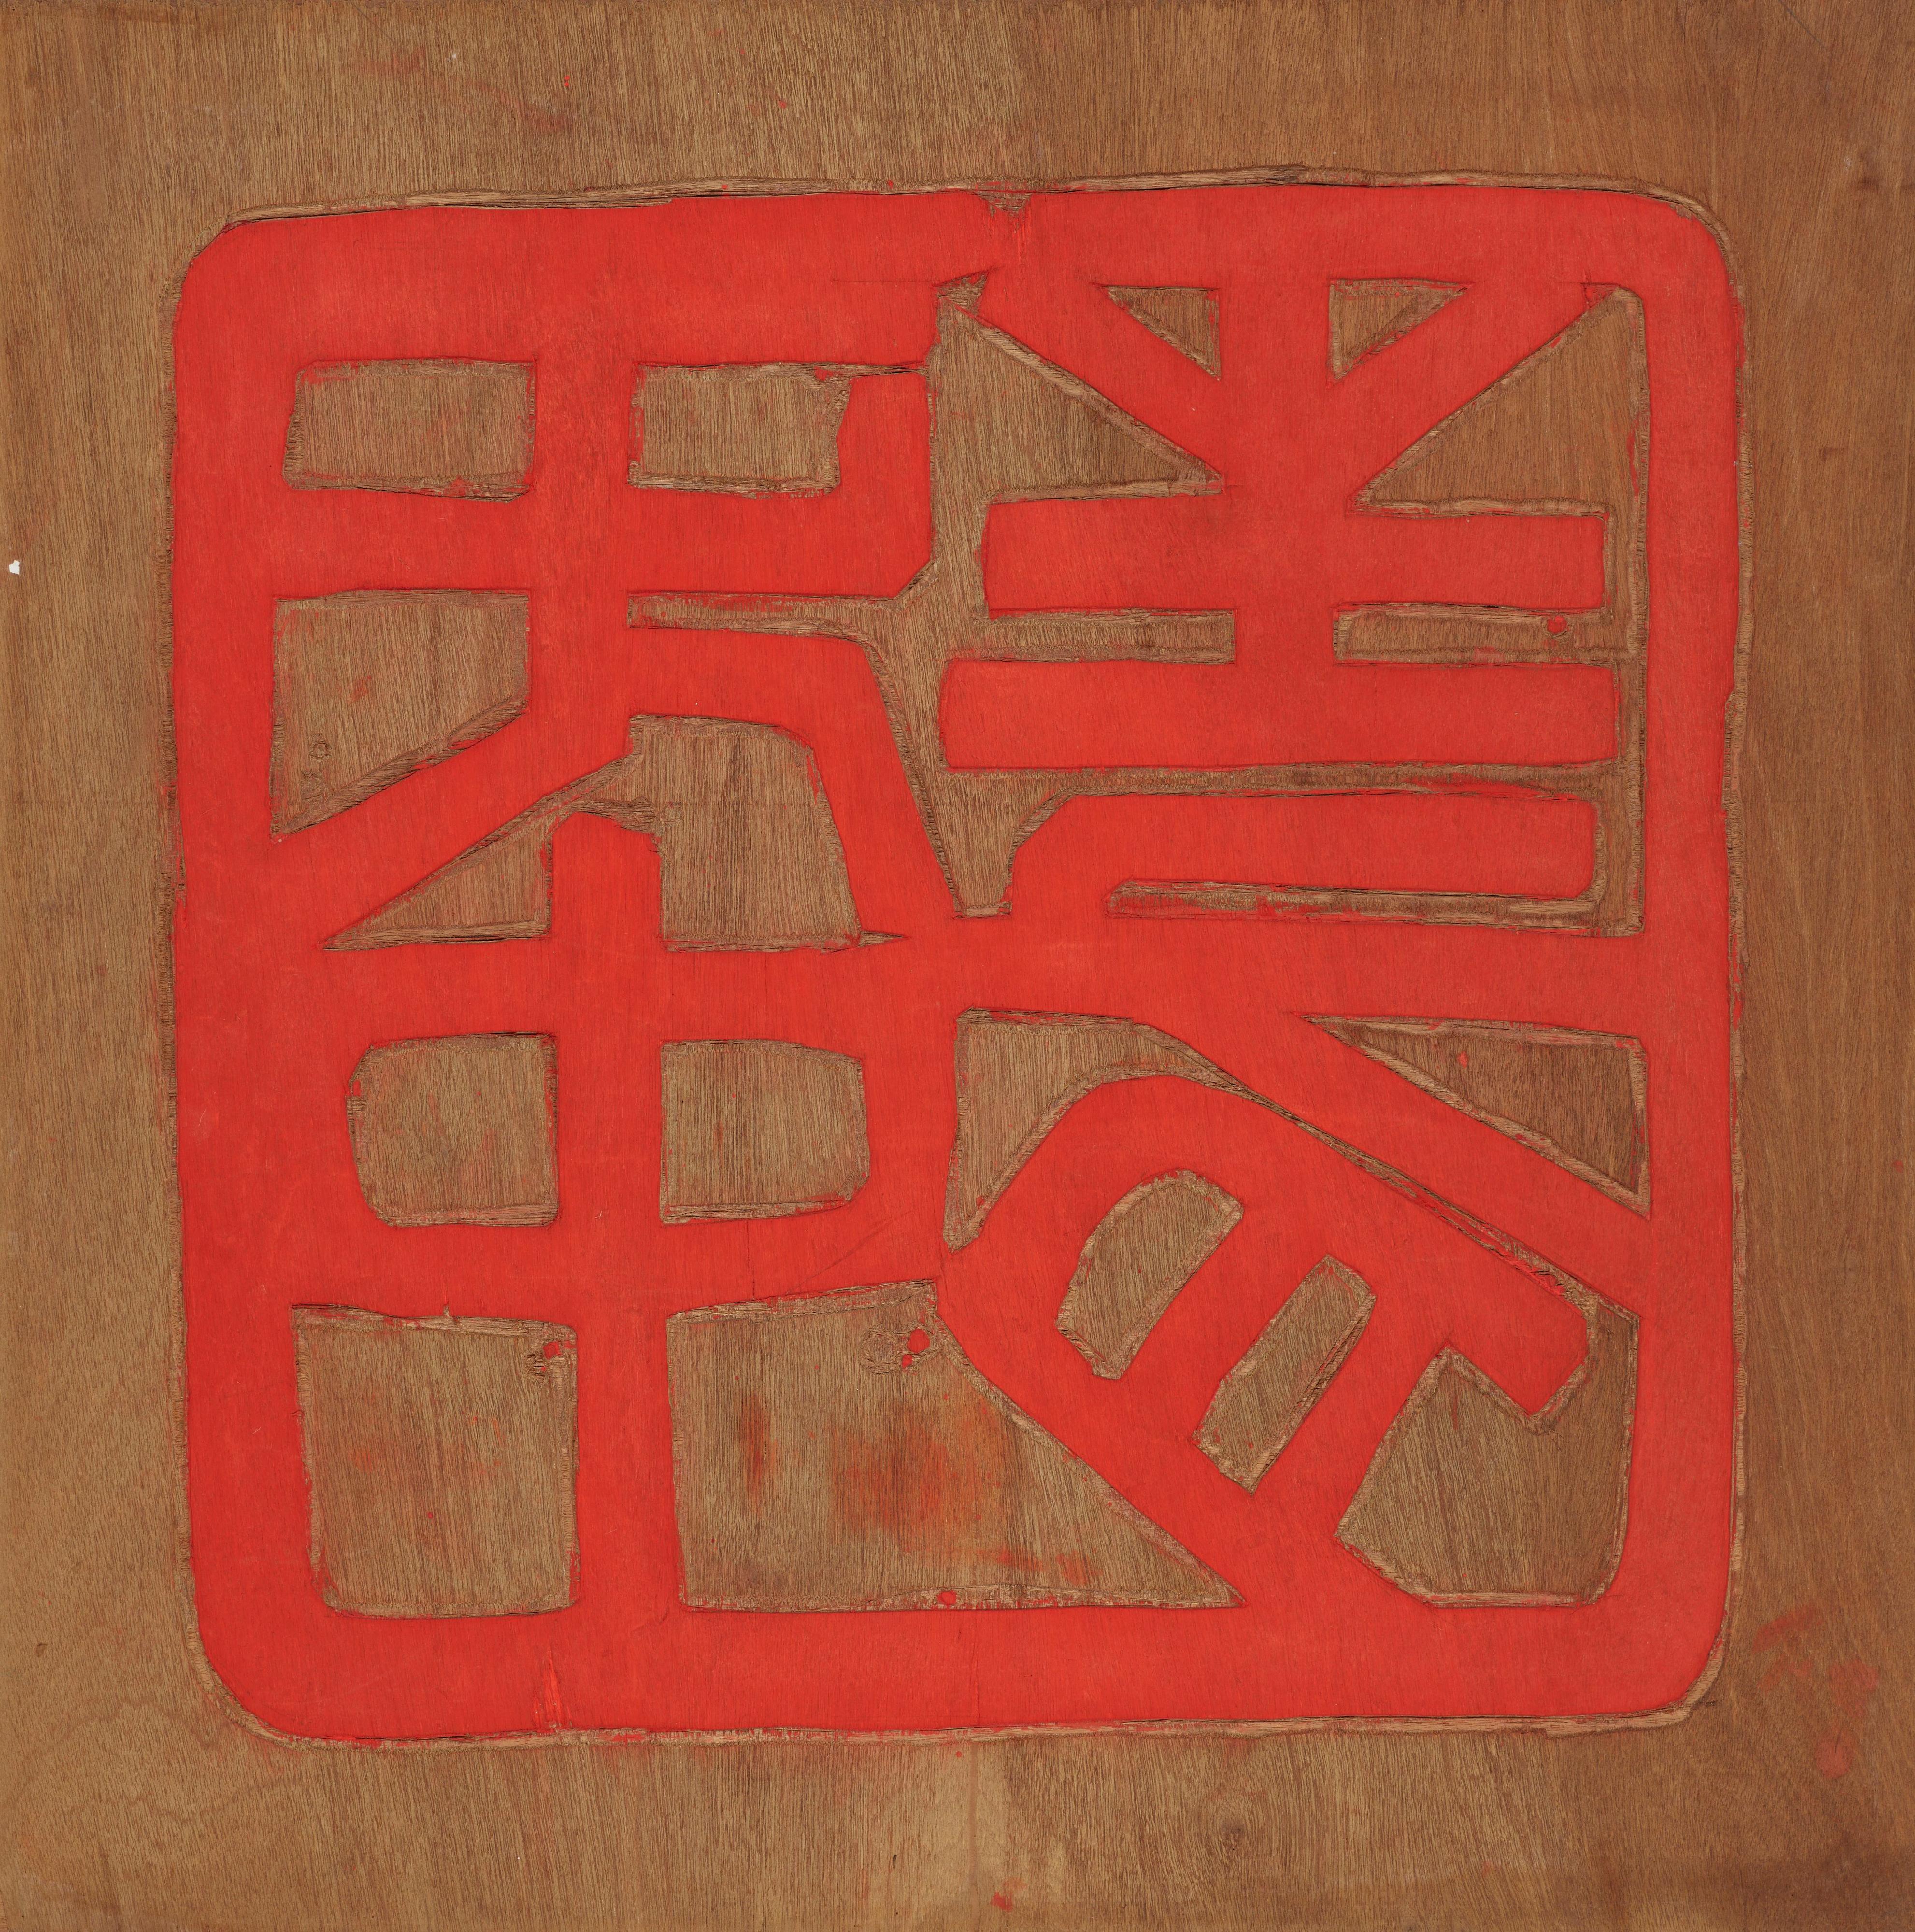 The Hong Kong Museum of Art has received a generous donation of 37 artworks from Ms Chiu Wai-yee, the wife of the late renowned Hong Kong artist Tong King-sum. The donated artworks include works by Tong and the late Hong Kong renowned artist Cheung Yee. Picture shows Tong's seal prints work. 